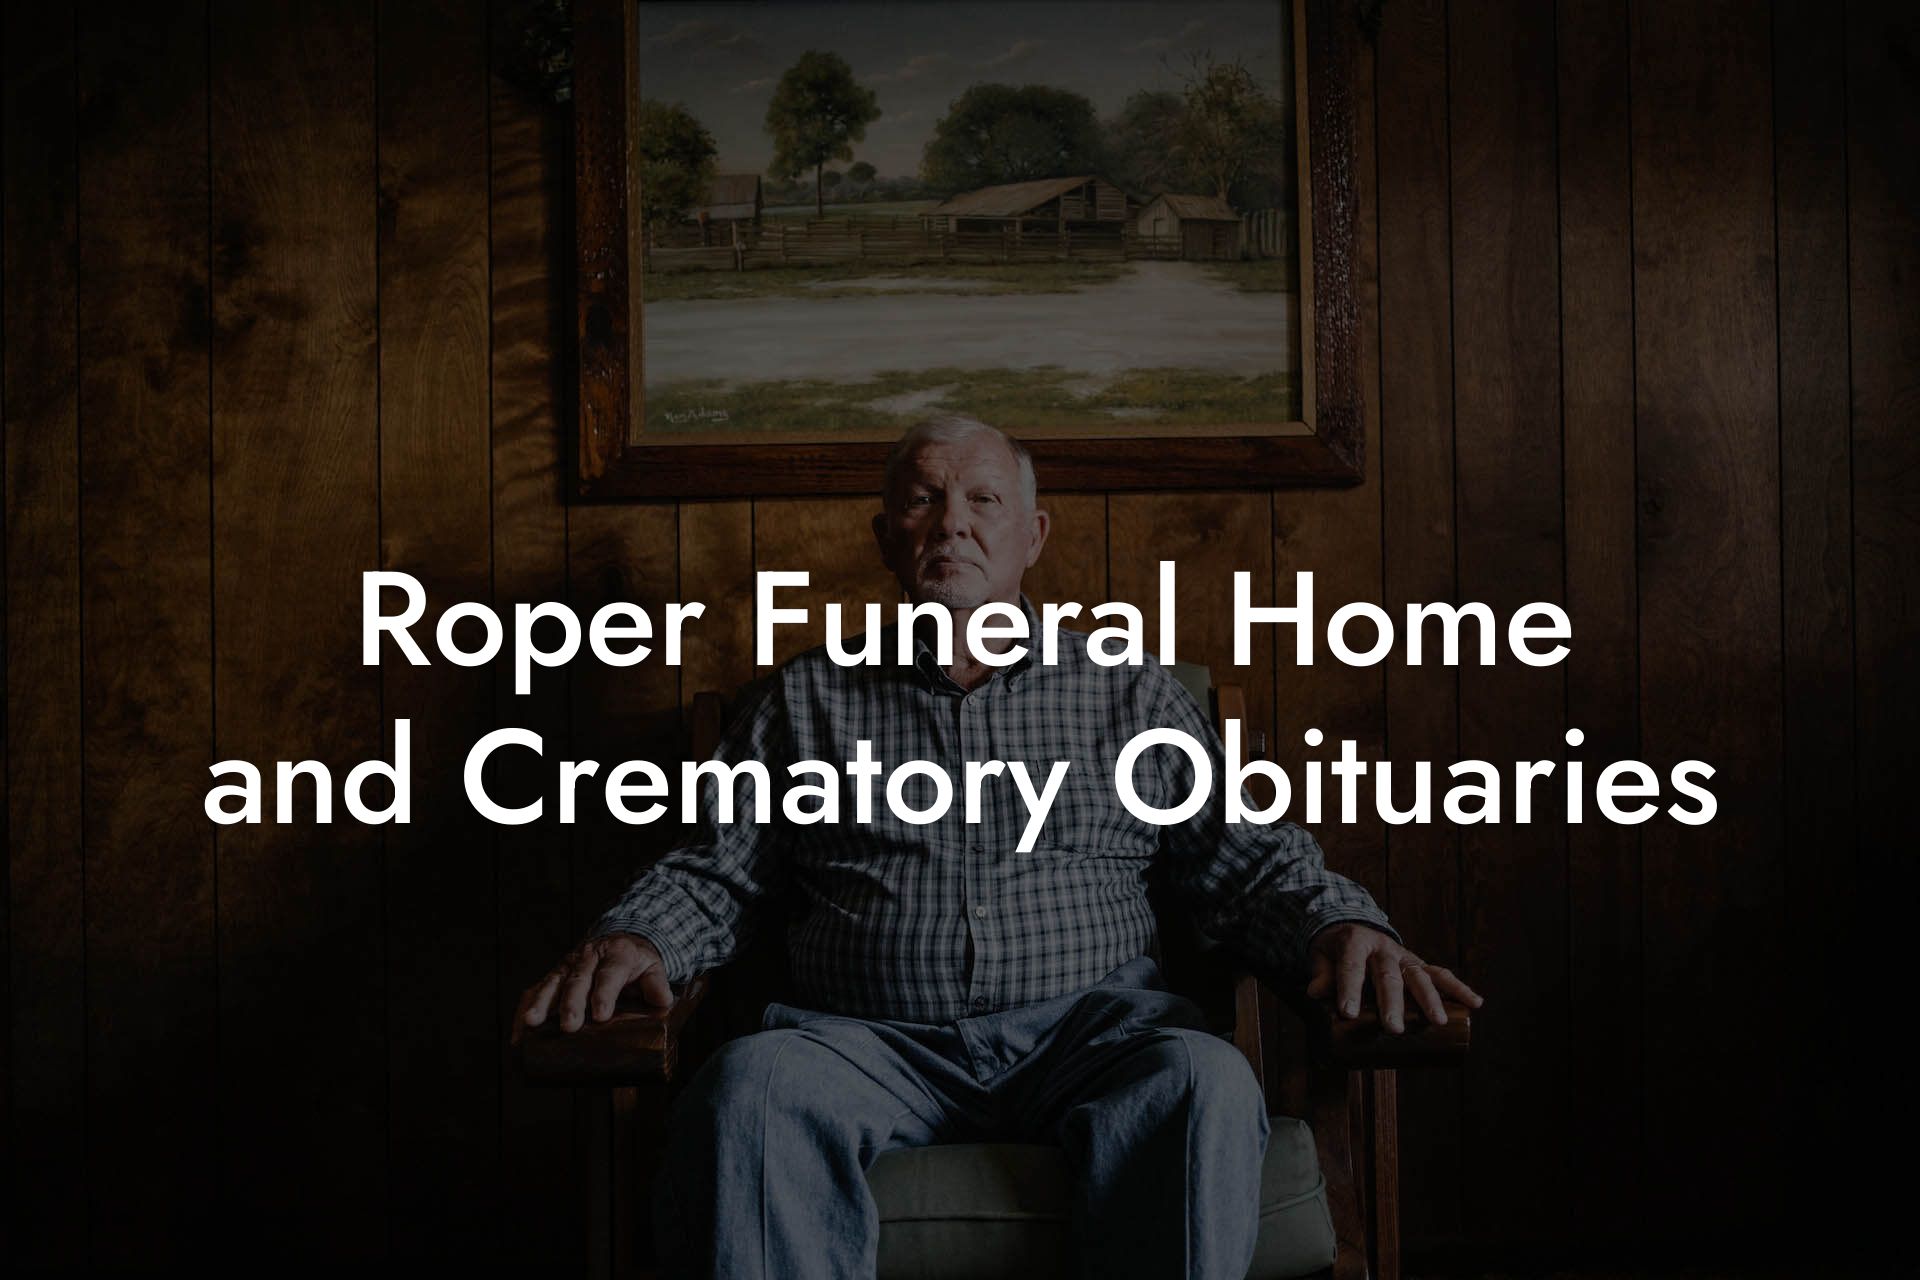 Roper Funeral Home and Crematory Obituaries